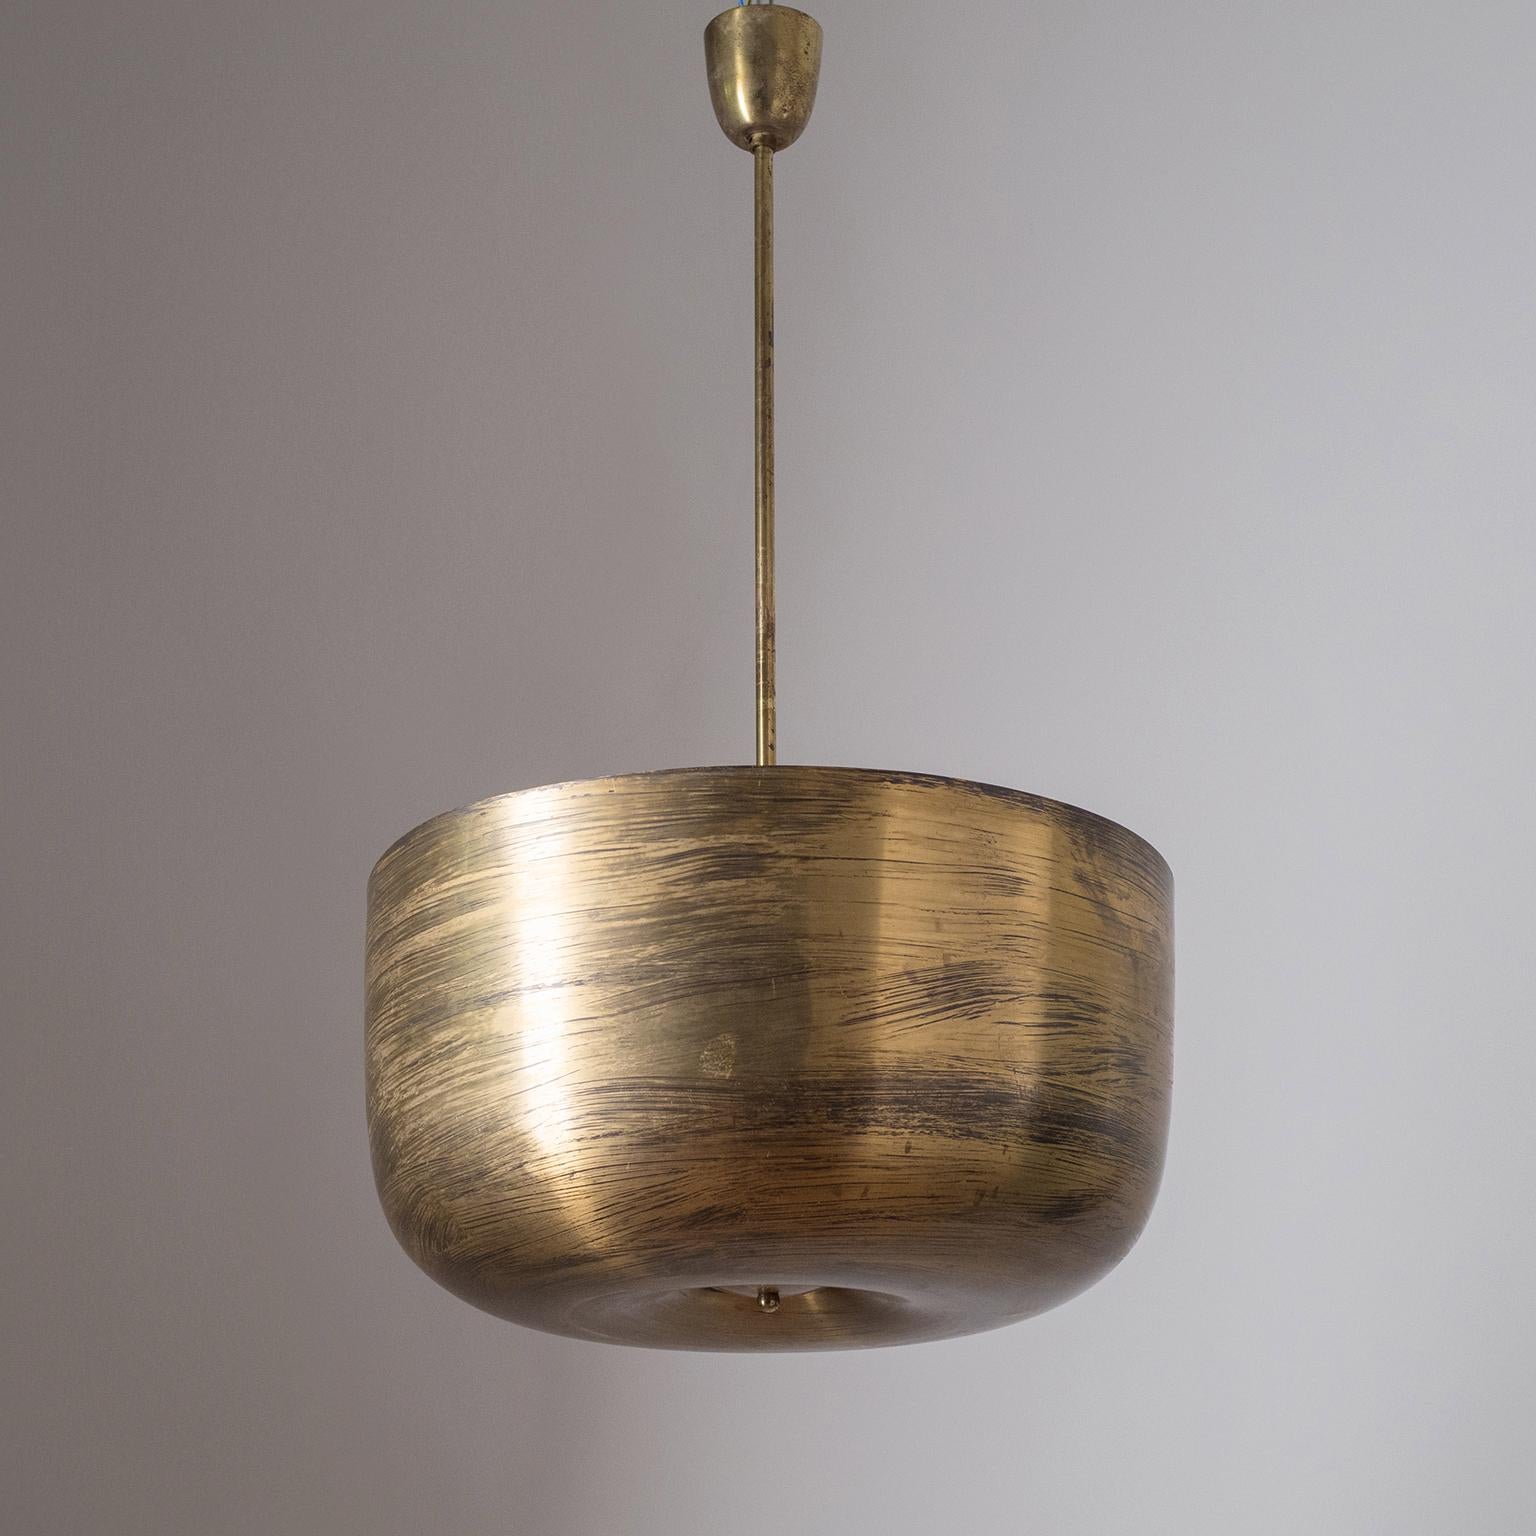 Rare oversize brass bowl chandelier, circa 1930. Made from a single piece of turned brass and with a height of 10inches/25cm the brass bowl has an exceptional sculptural quality with a beautifully aged patina. Four nickel and ceramic E27 sockets